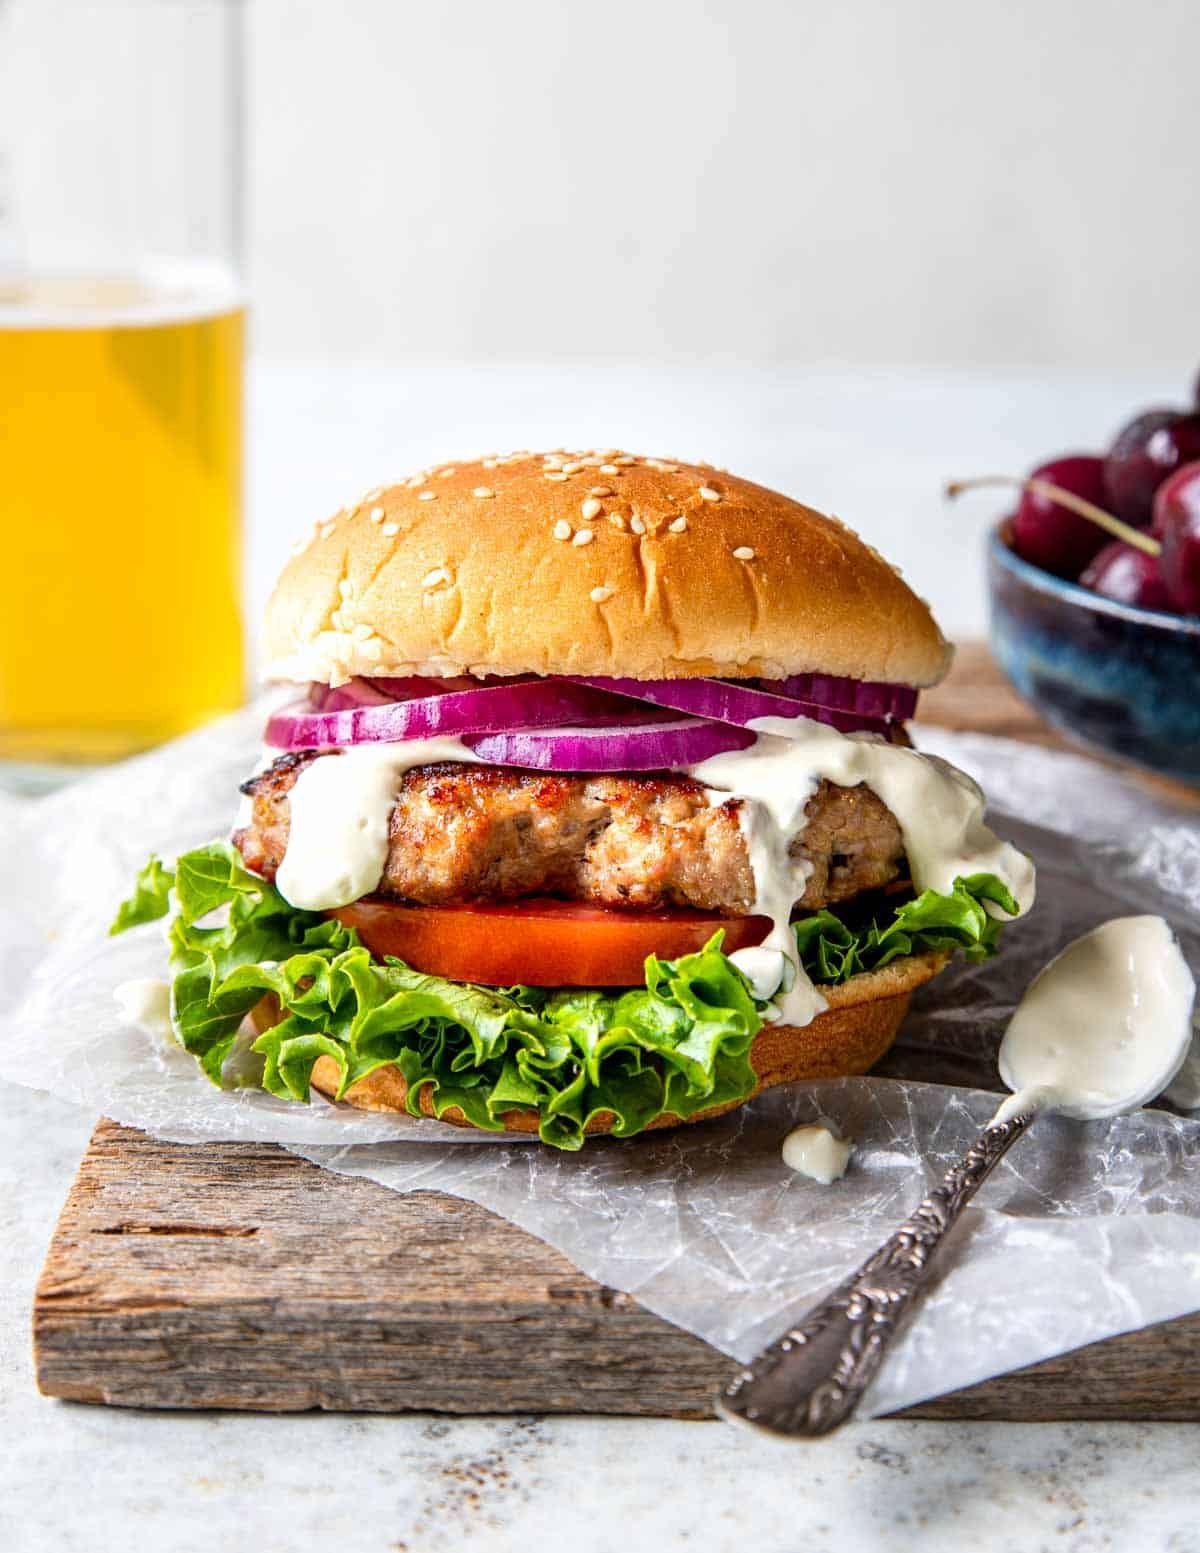 Grilled Pork burger on a bun with garlic cream sauce, tomato and lettuce